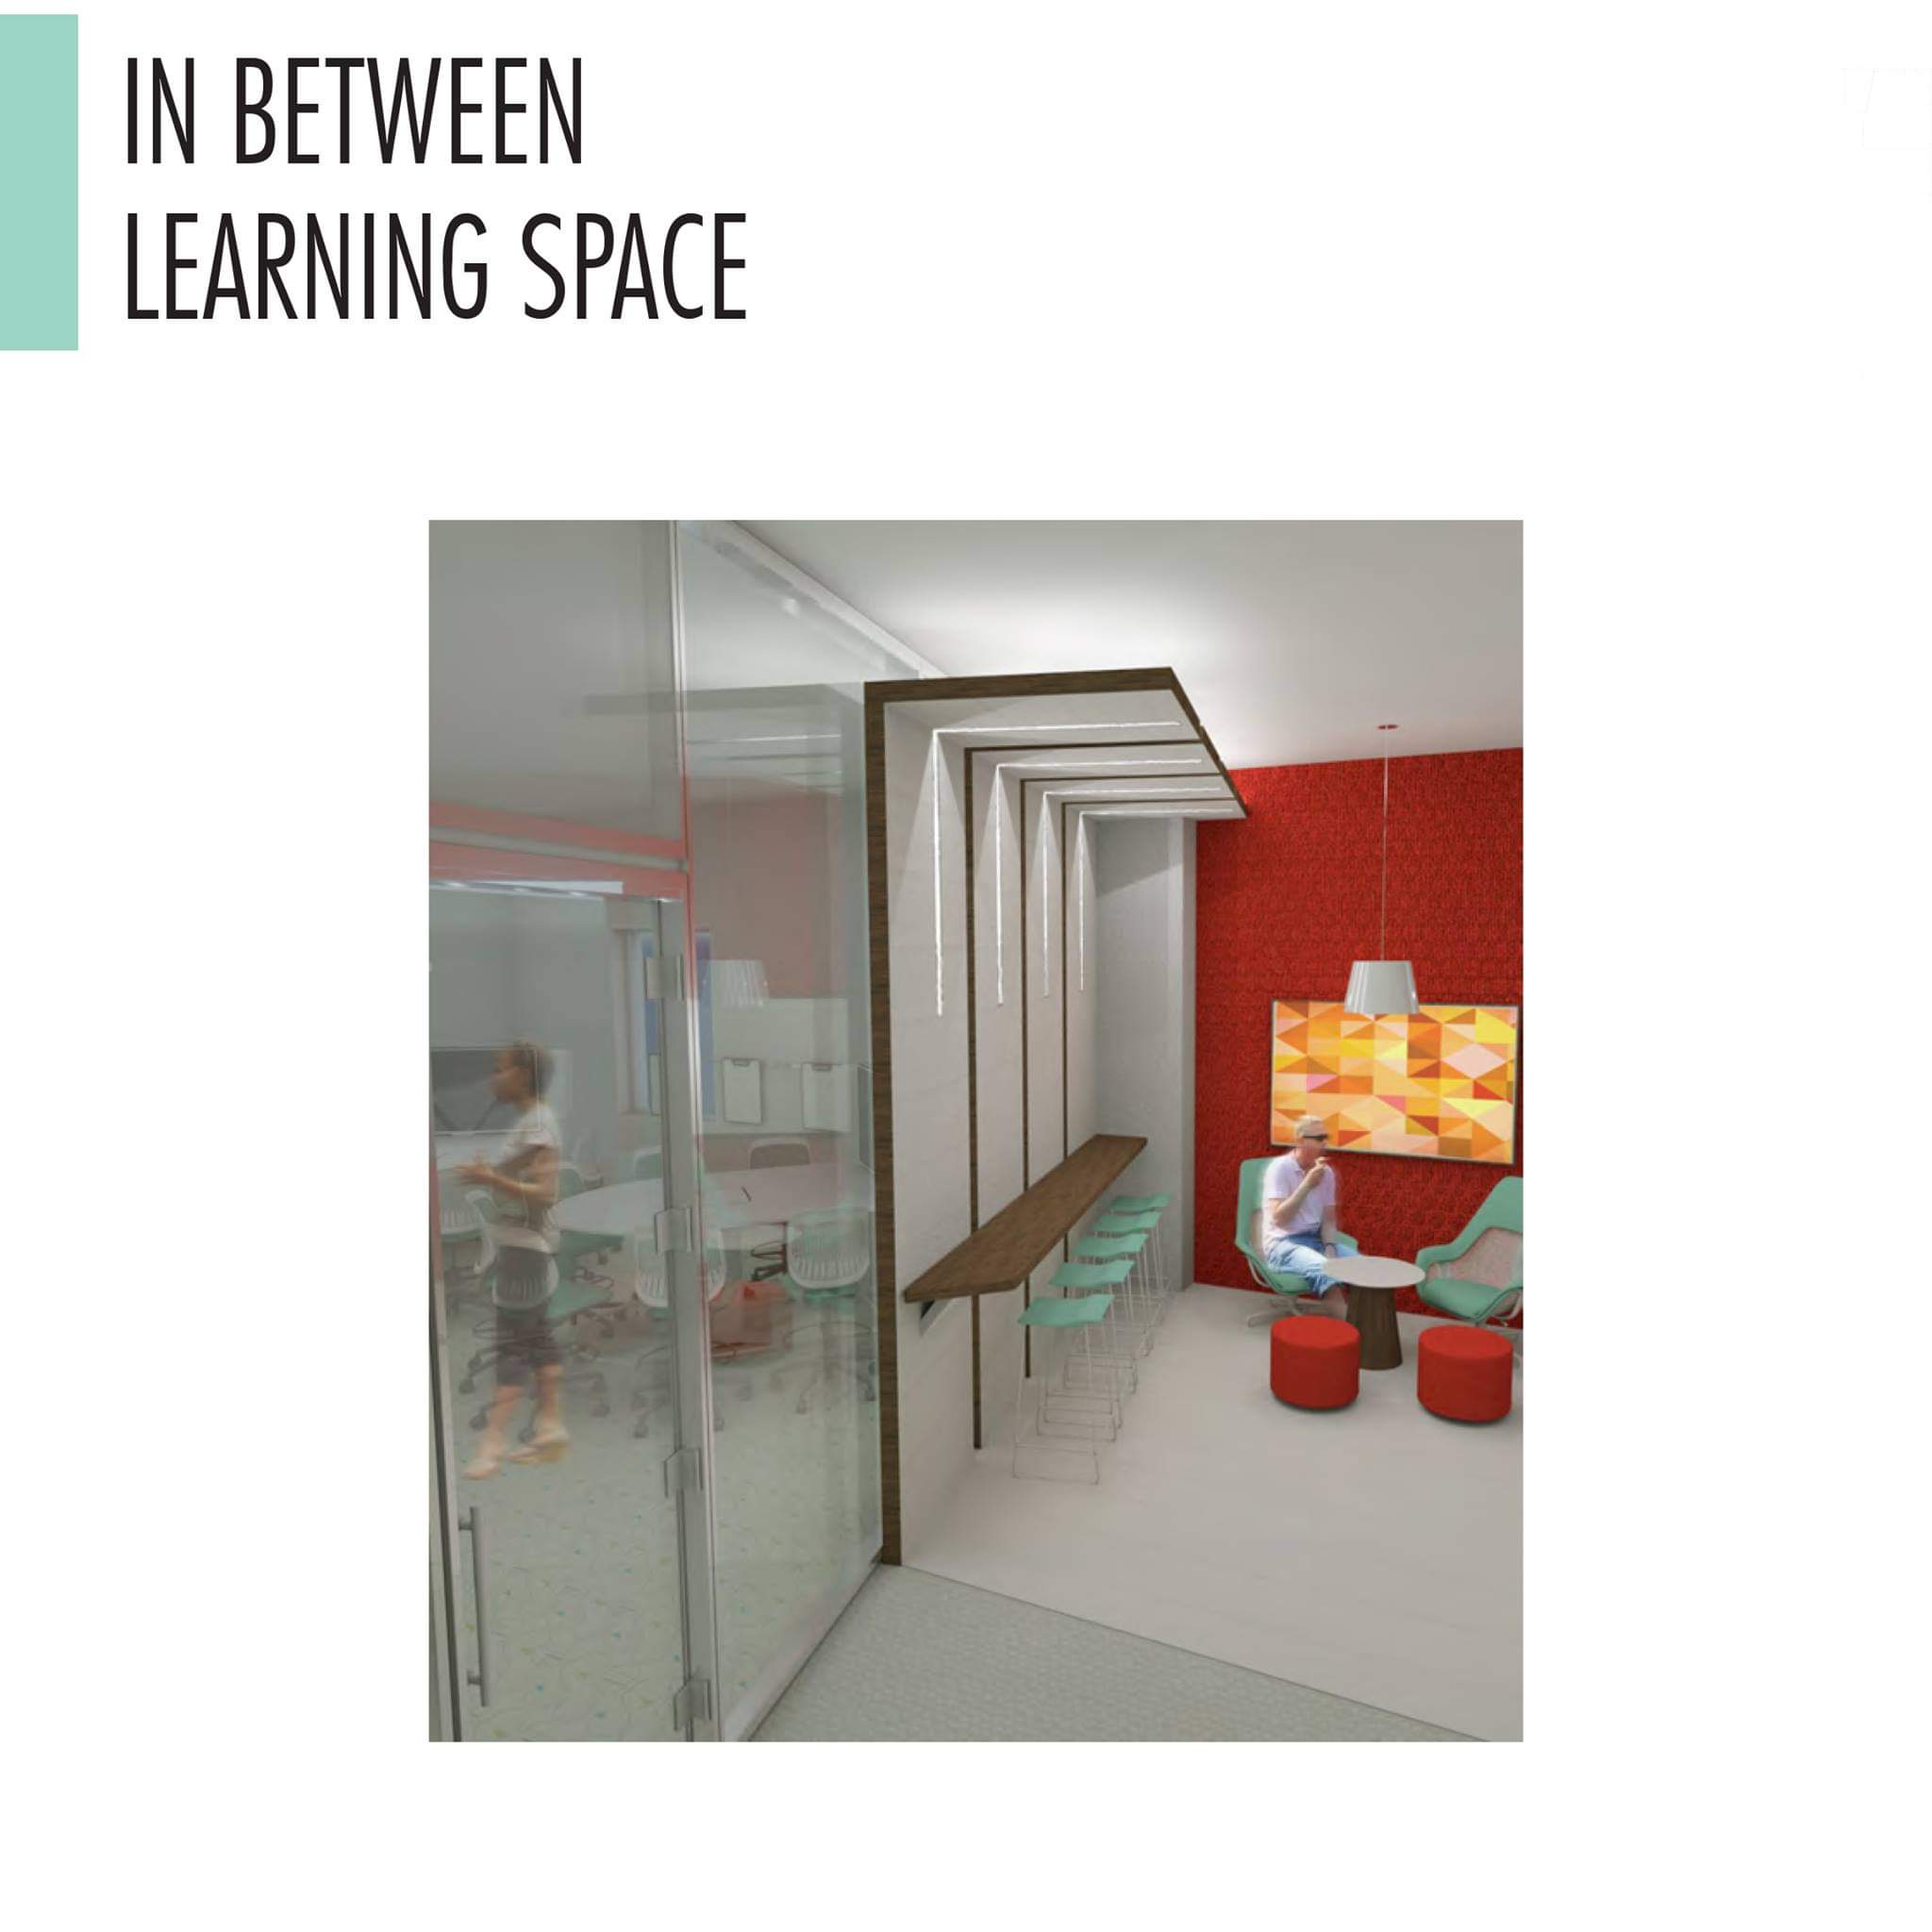 NEXT learning space with variable seating and a red wall